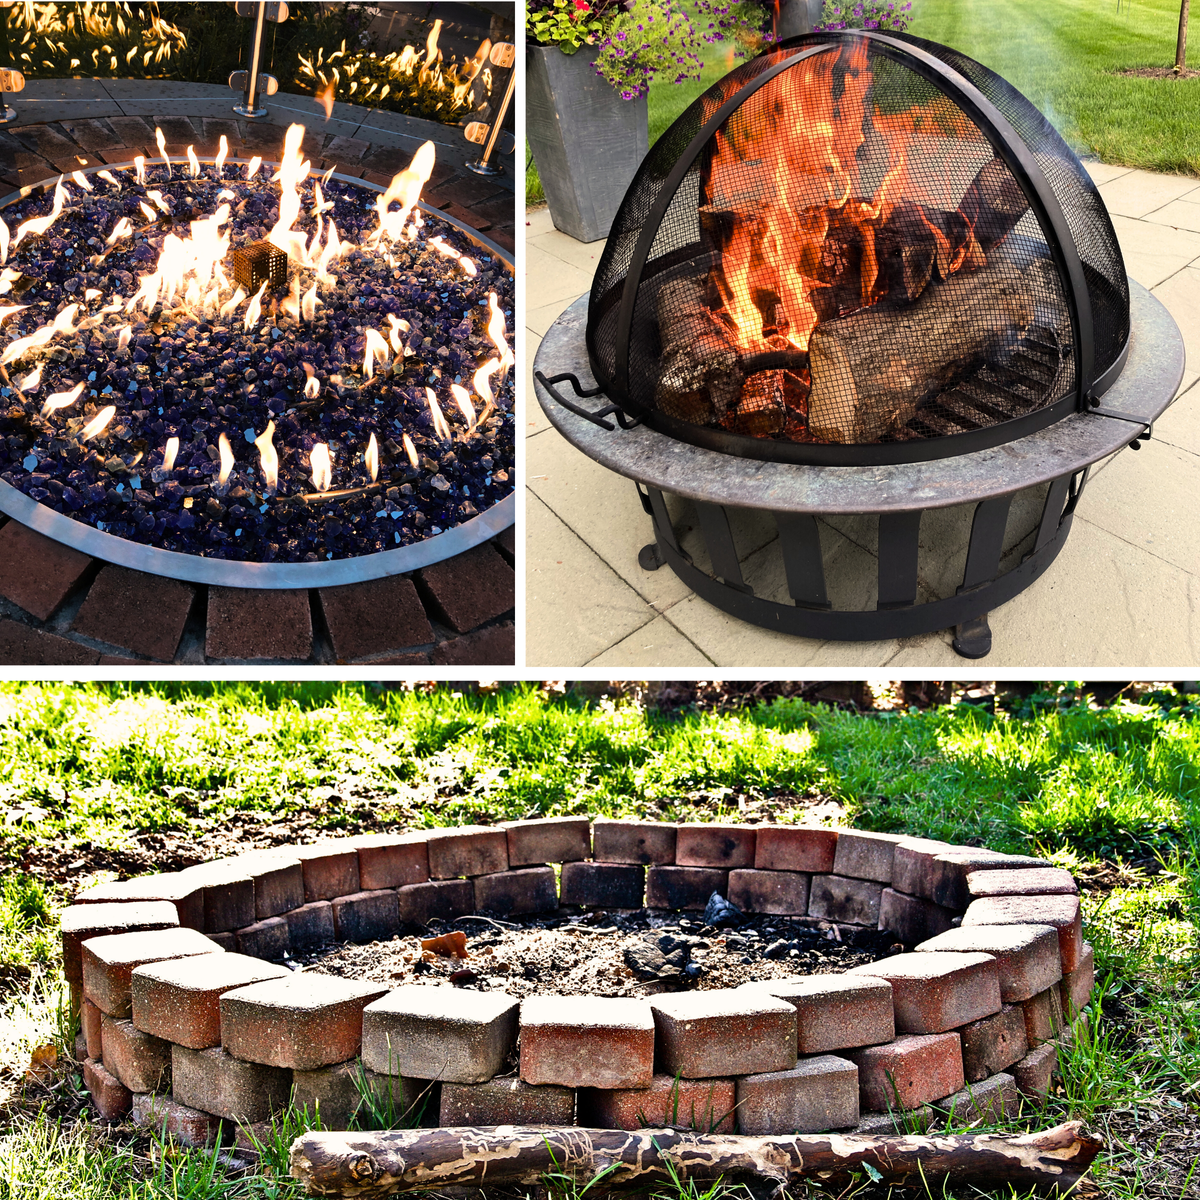 Don't Get Burned: What To Look for When Buying A Fire Pit